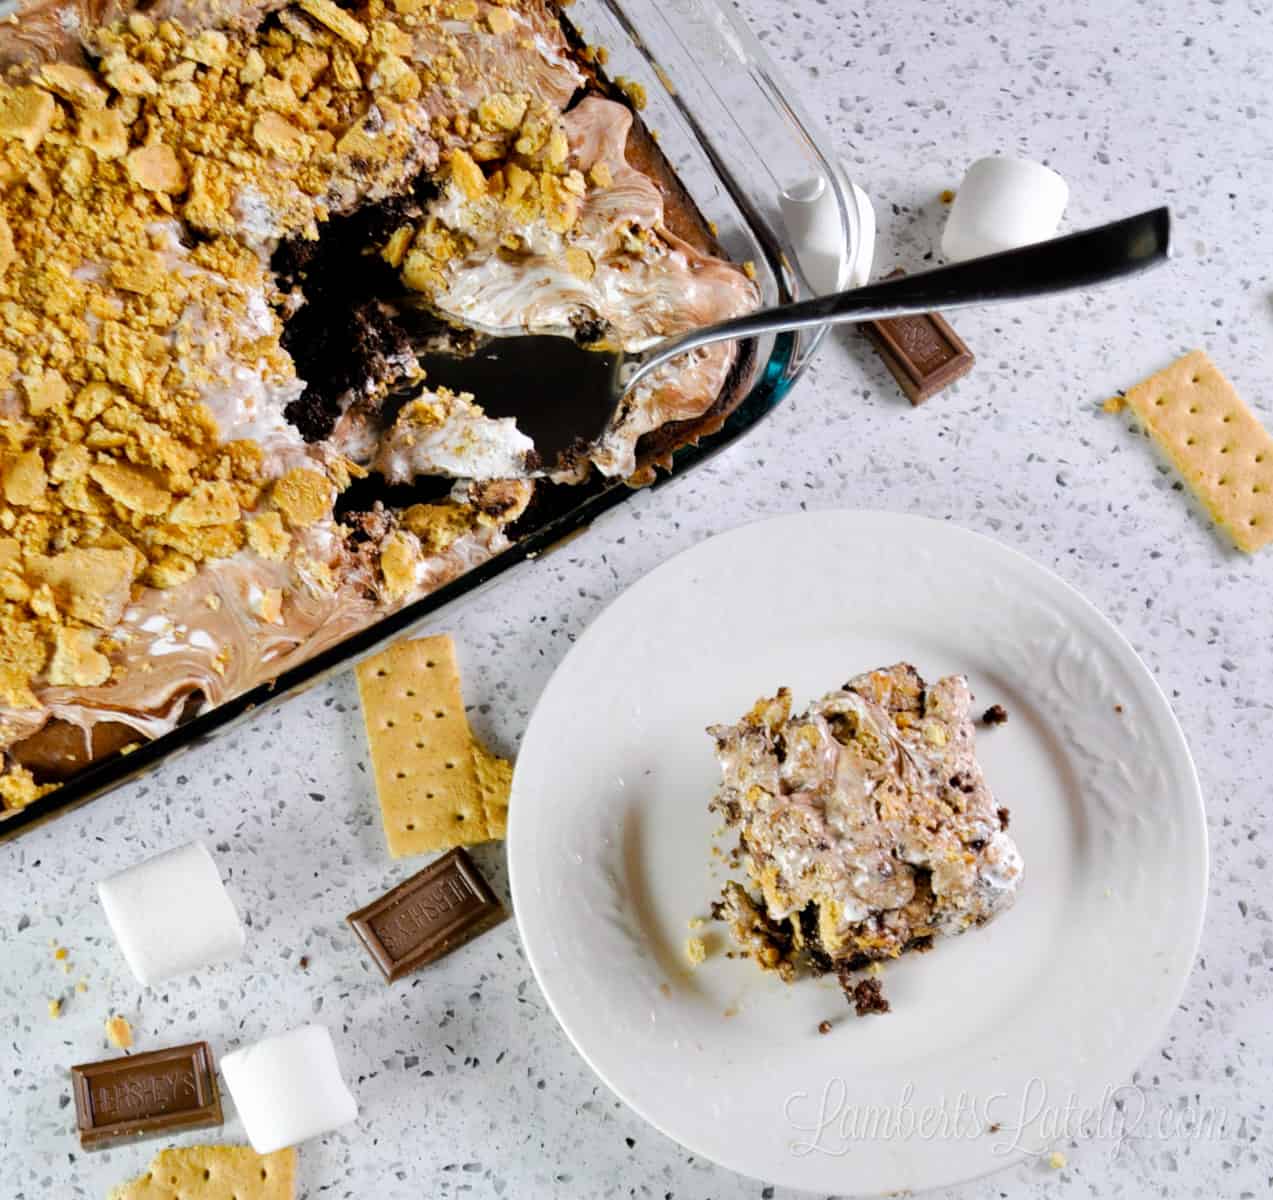 smores cake in a baking dish with a serving utensil; piece of cake on a plate next to it, with graham cracker, chocolate, and marshmallows spread on counter.